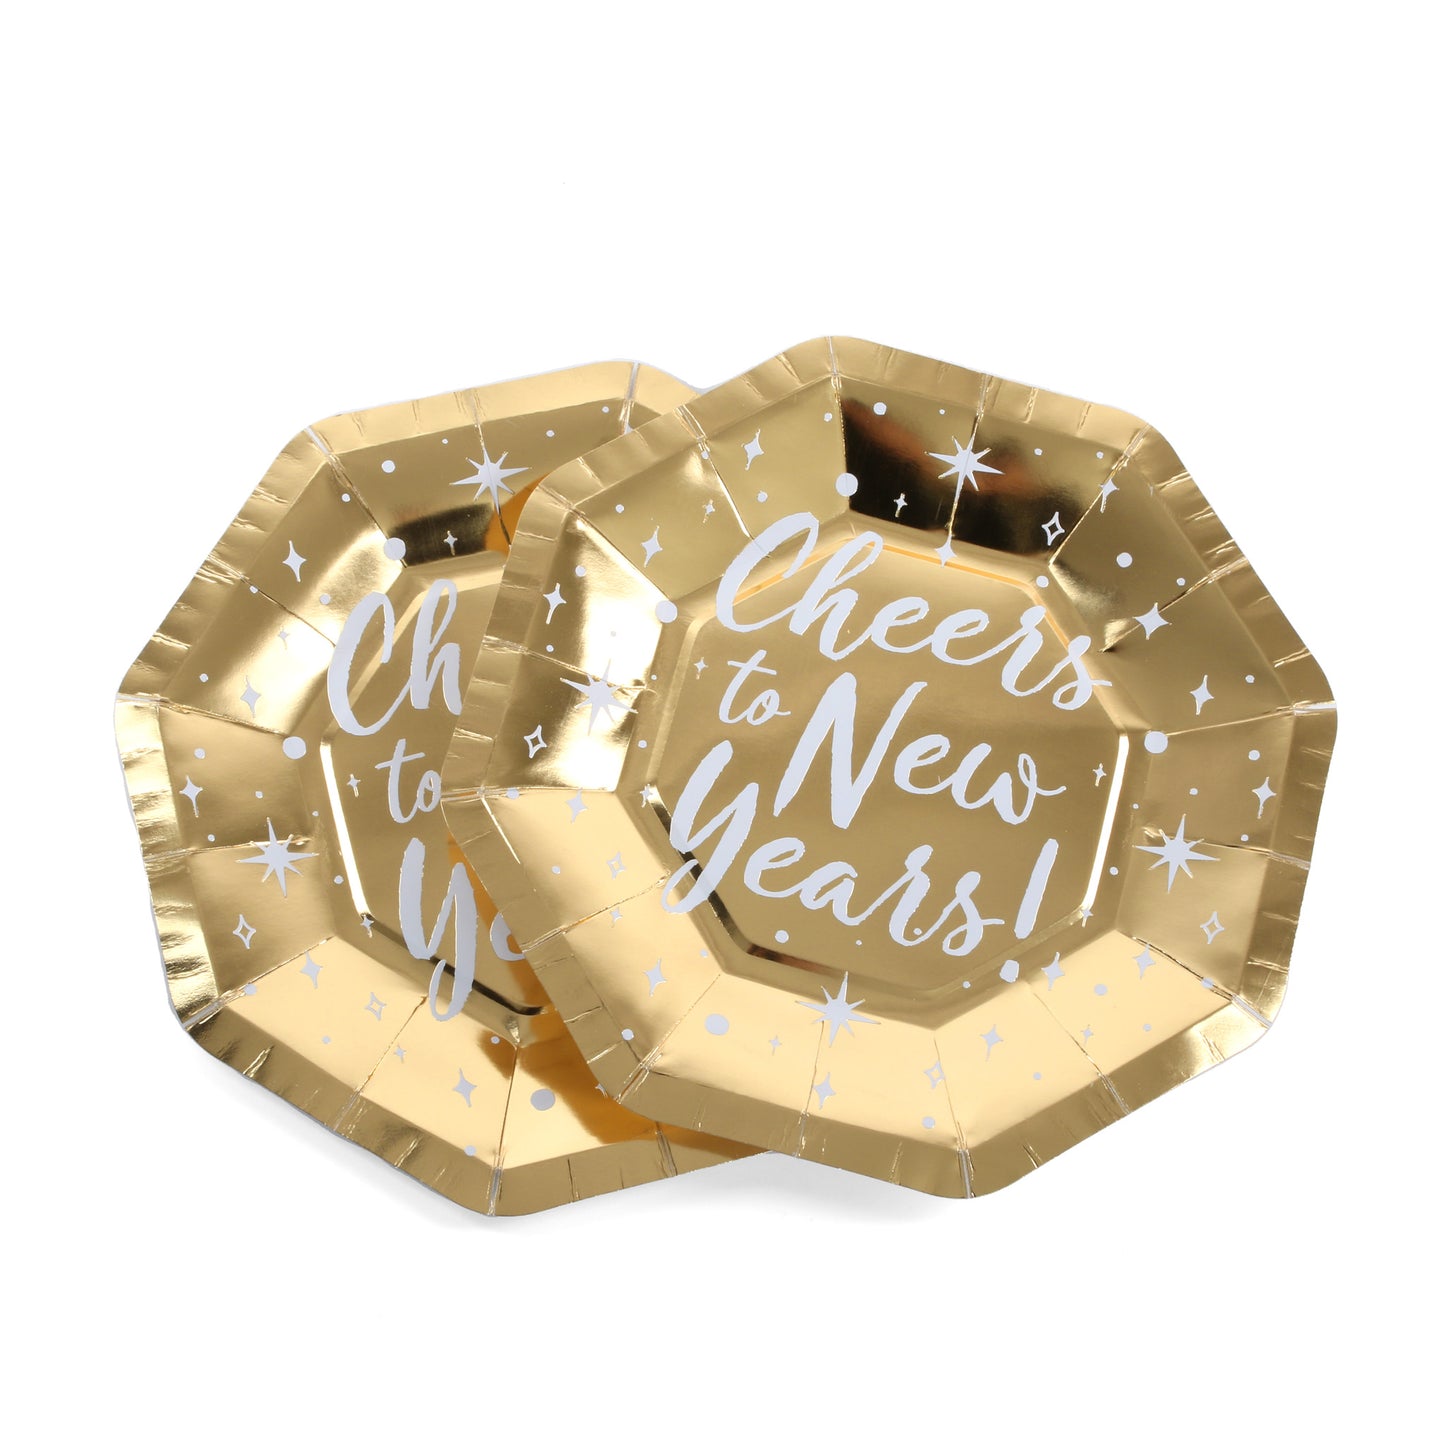 Cheers to New Year's Design 9 Inch Paper Plates Pack of 10